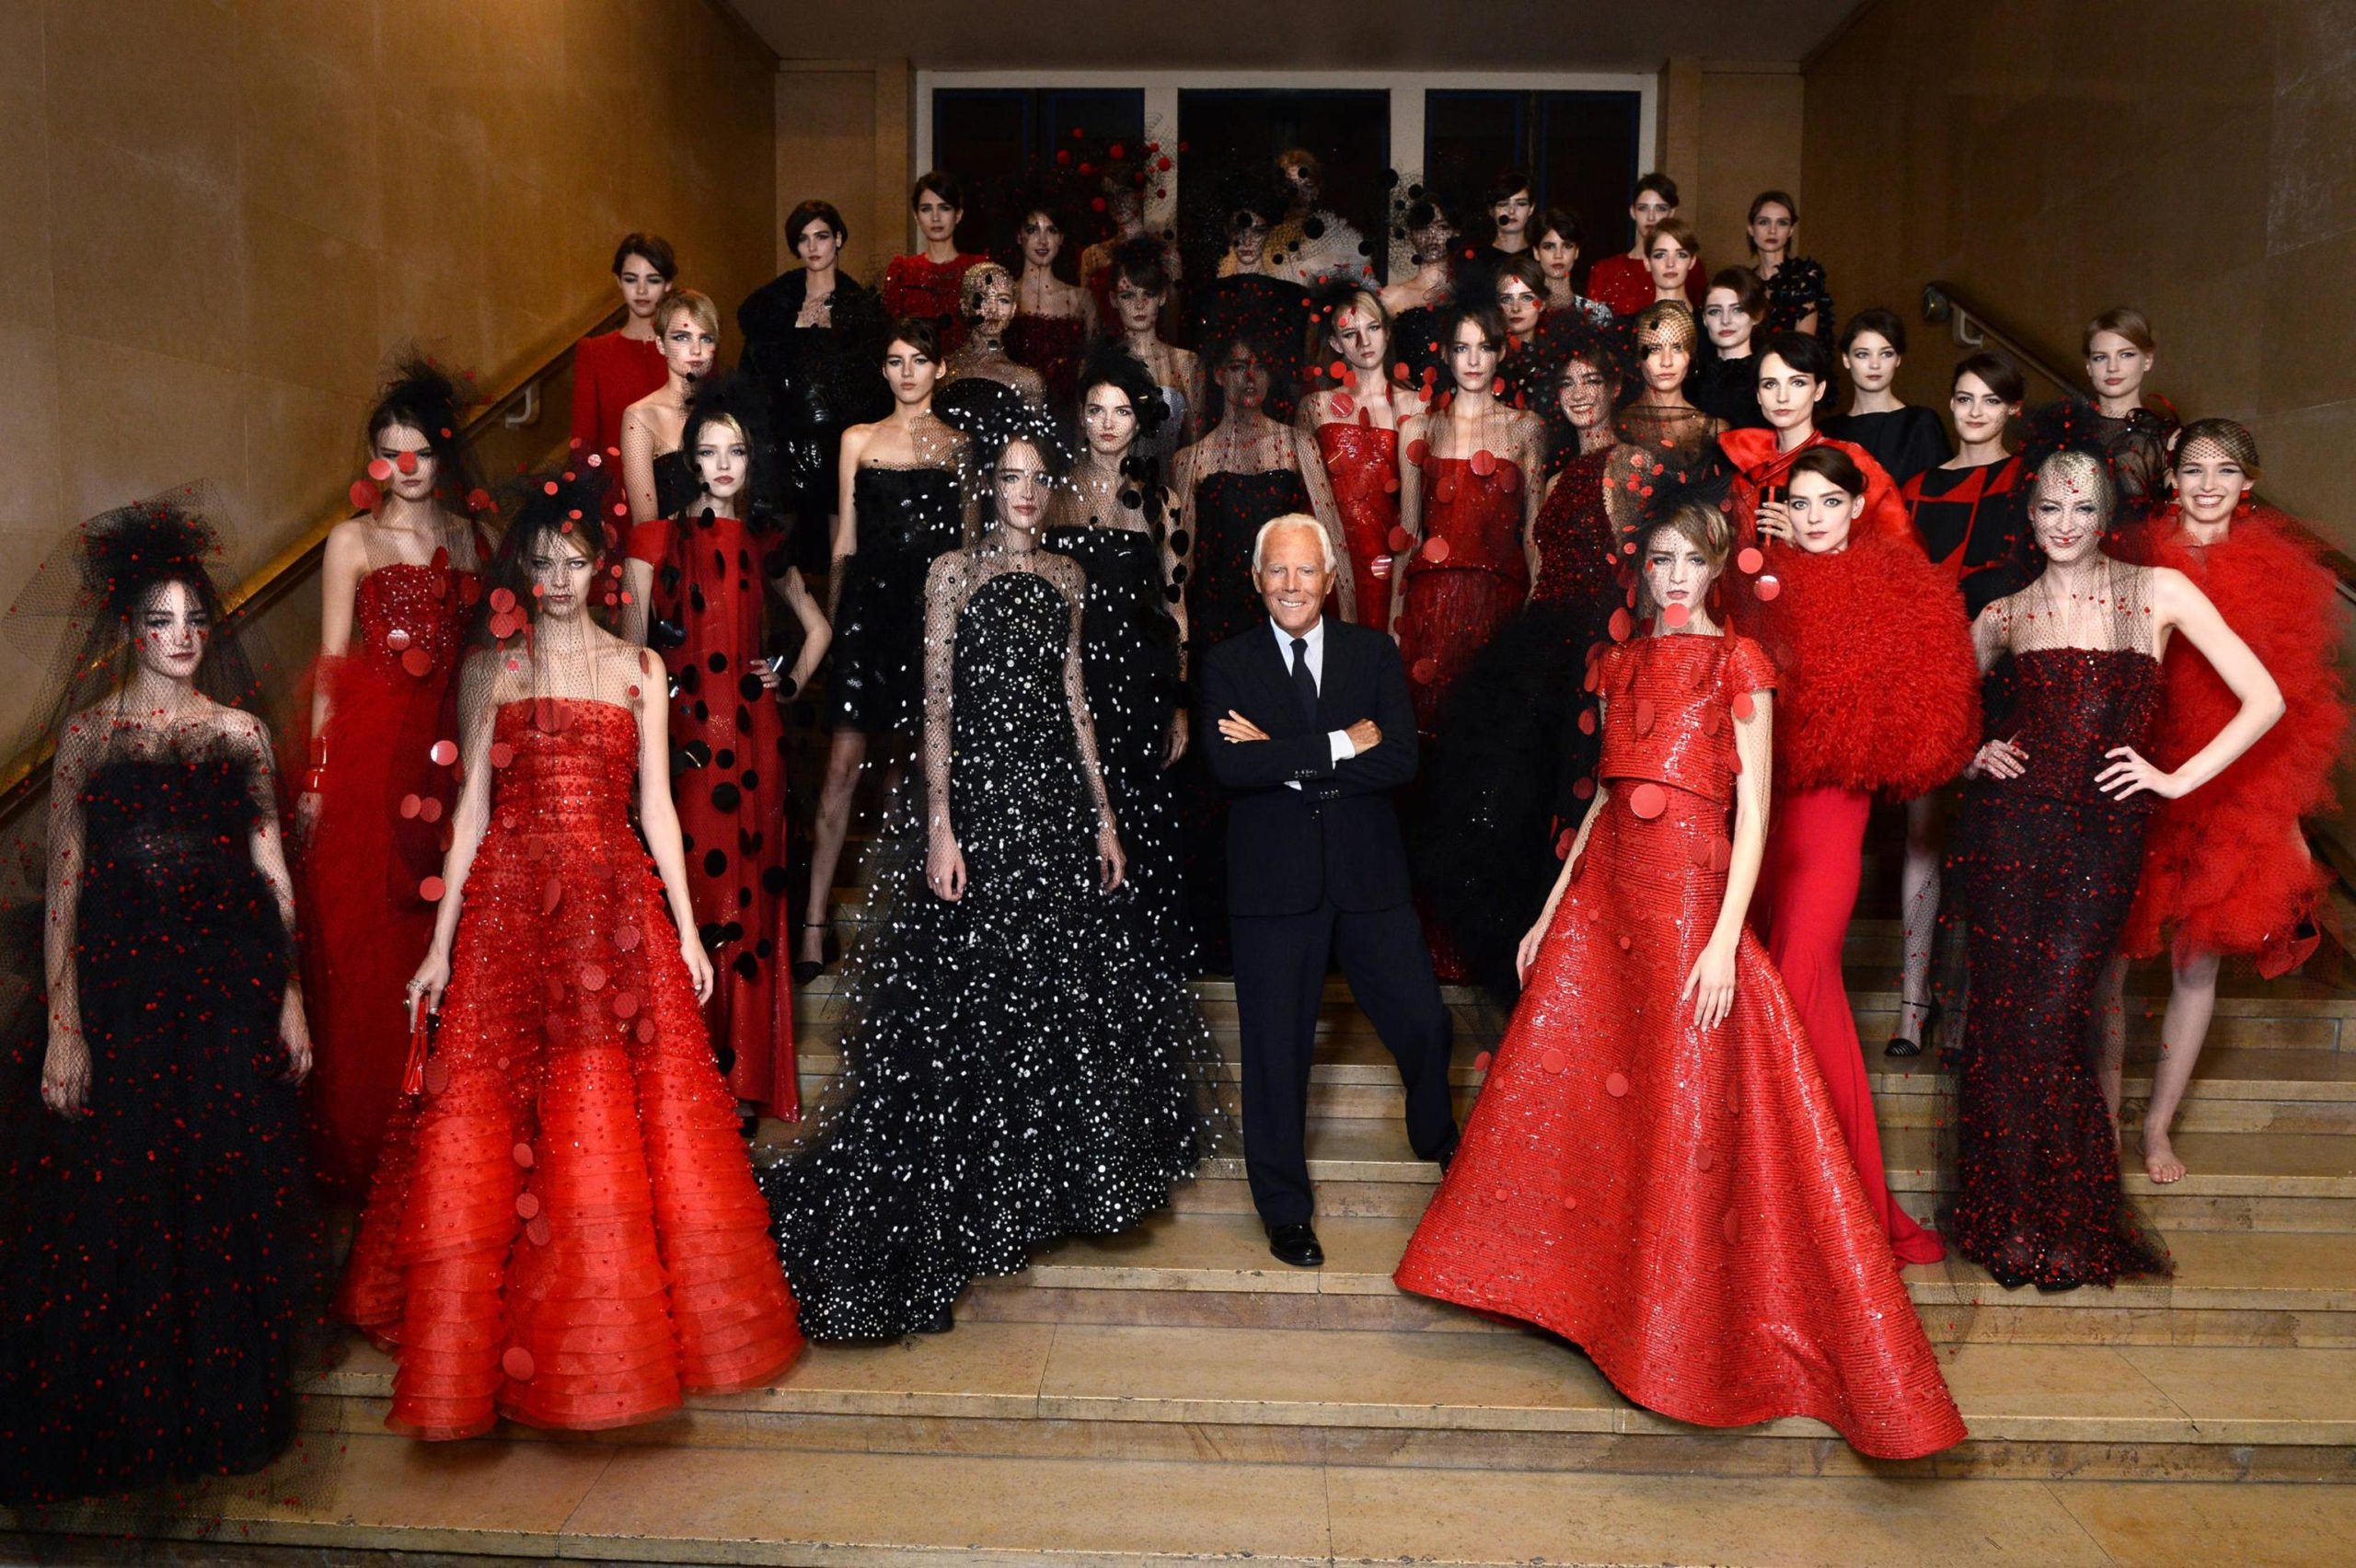 Giorgio Armani and models pose for a picture during the Giorgio Armani Privé Show as part of Paris Fashion Week Haute Couture Fall-Winter 2014-2015 in Paris, France, 08 July 2014. ANSA/ GIORGIO ARMANI PRESS OFFICE  ++ HO - NO SALES, EDITORIAL USE ONLY ++